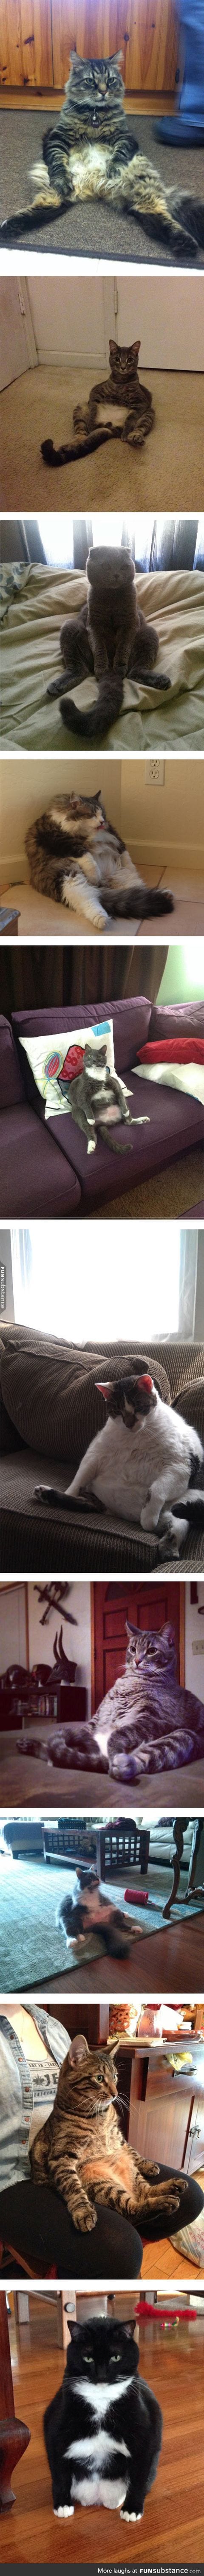 Cats who sit like humans